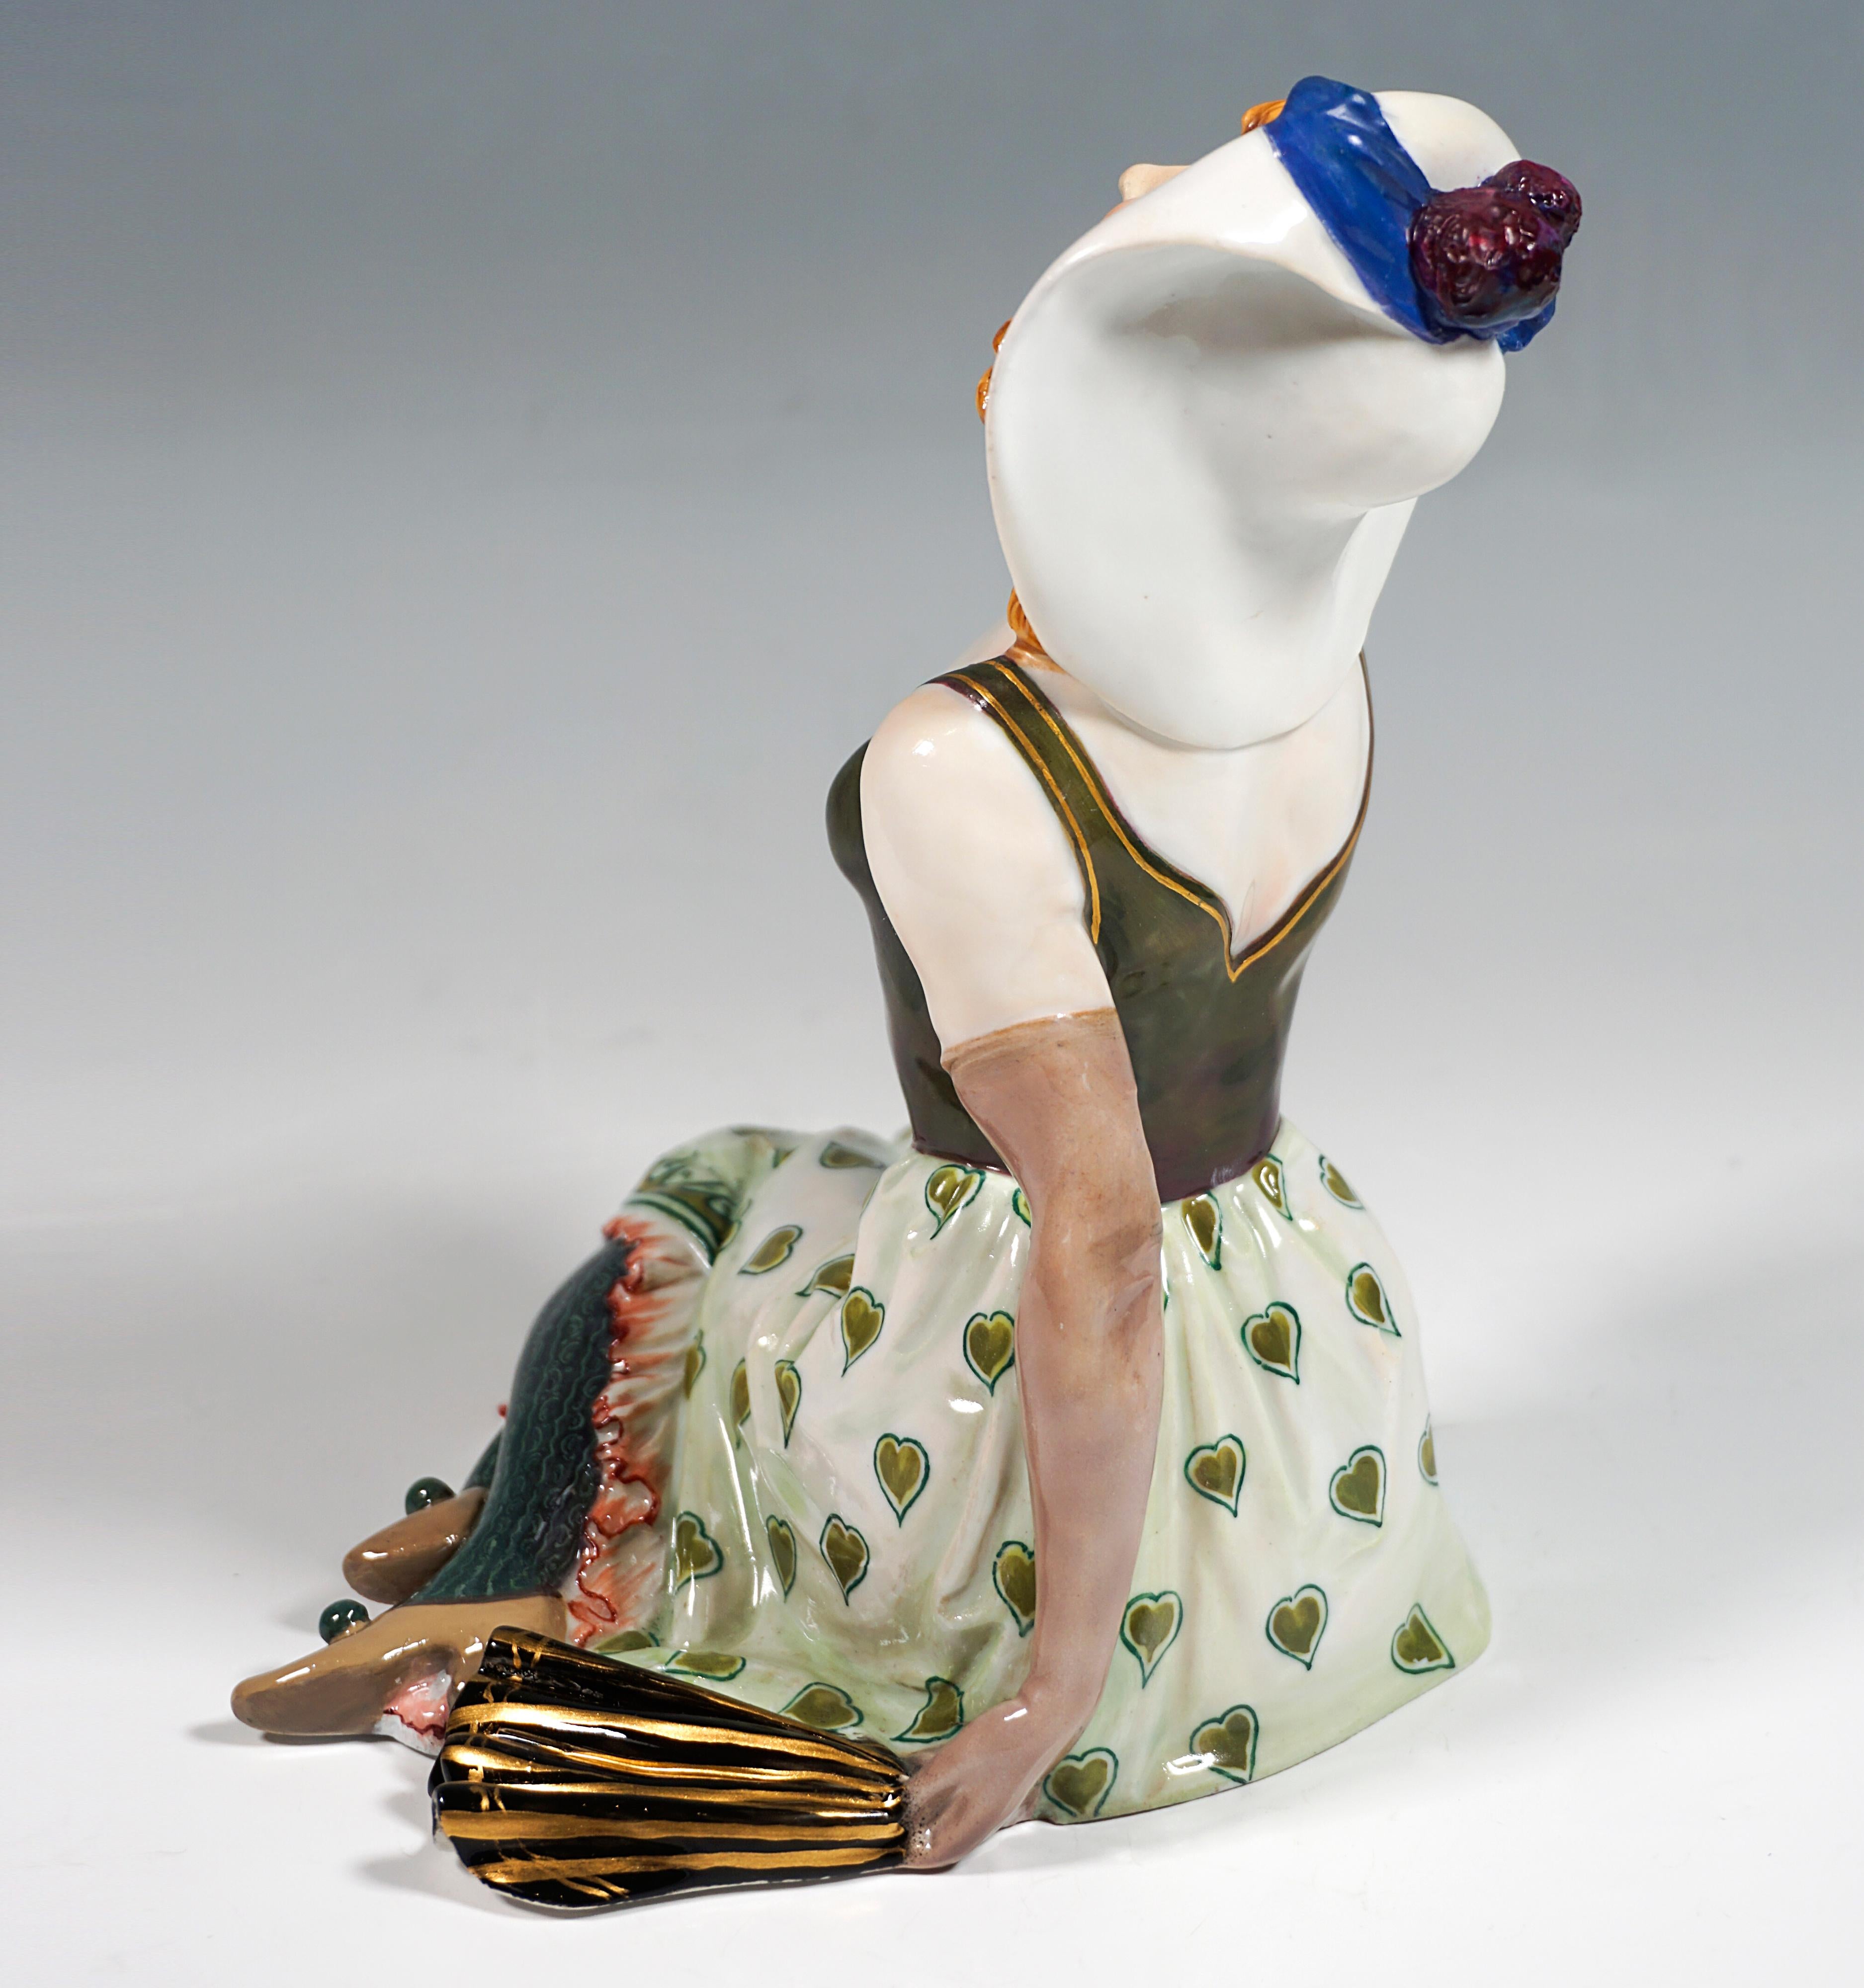 Art Nouveau Figurine 'Pierrette' by Martin Wiegand, Meissen Germany, ca 1908 In Good Condition For Sale In Vienna, AT